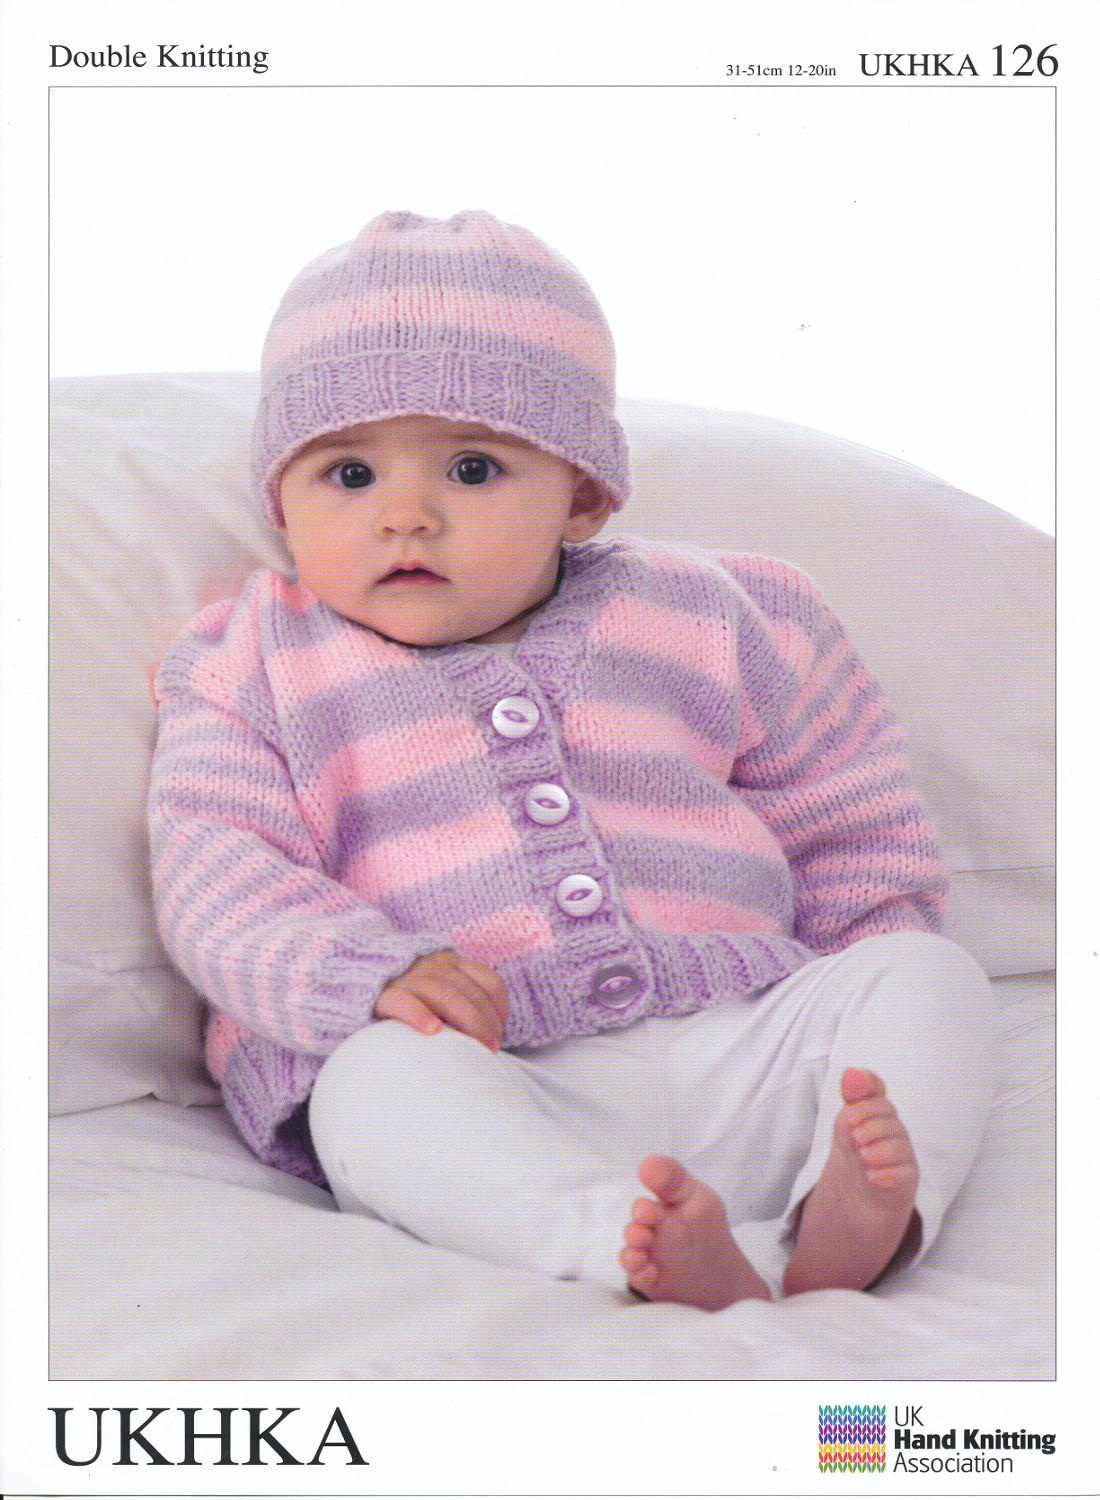 Double Knitting Patterns For Babies Free Details About Double Knitting Dk Pattern Ba Long Sleeved Striped Cardigan Hat Ukhka 126